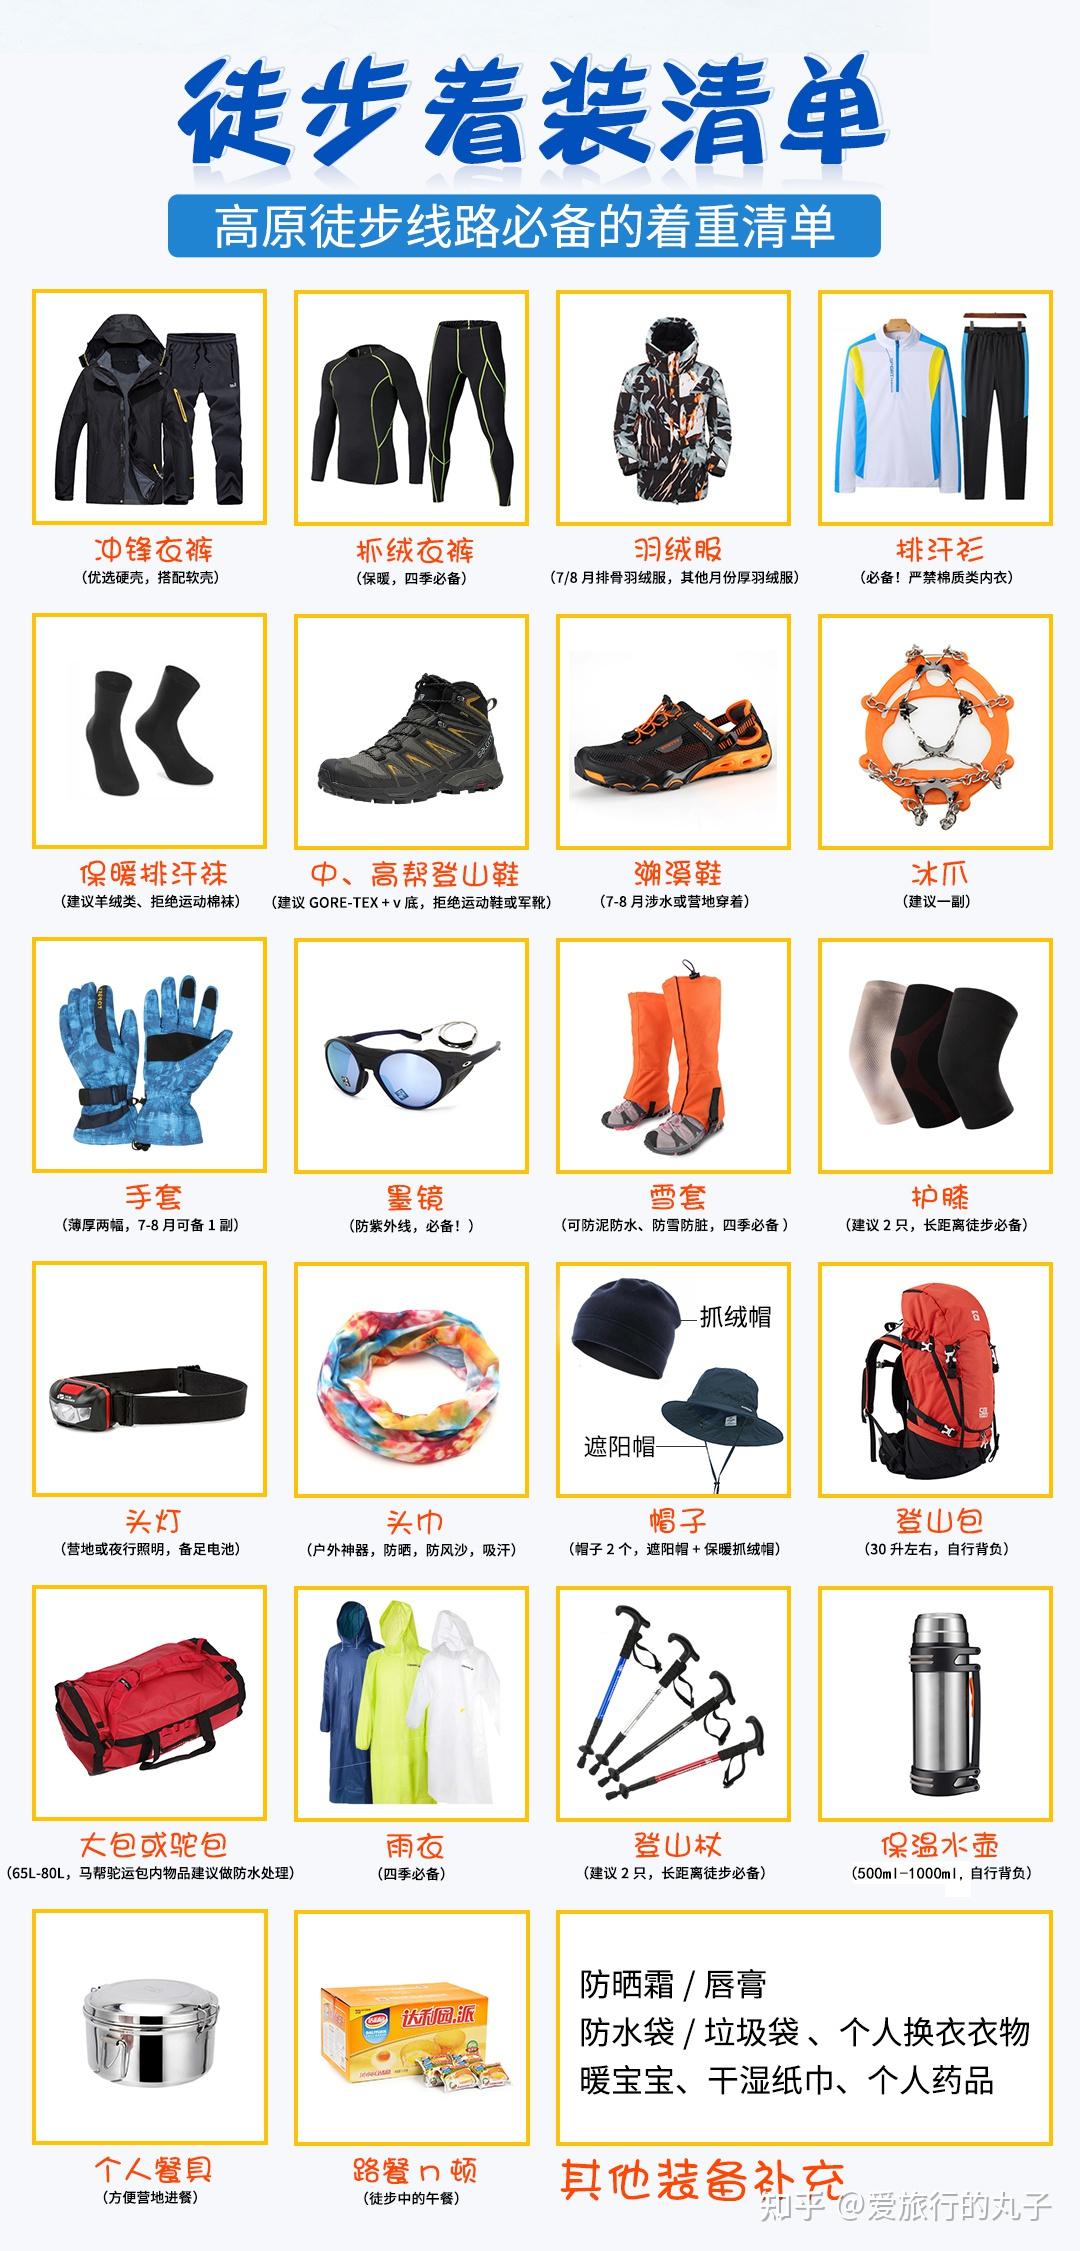 Learn about the mountain gear our experts recomend for your next climb.